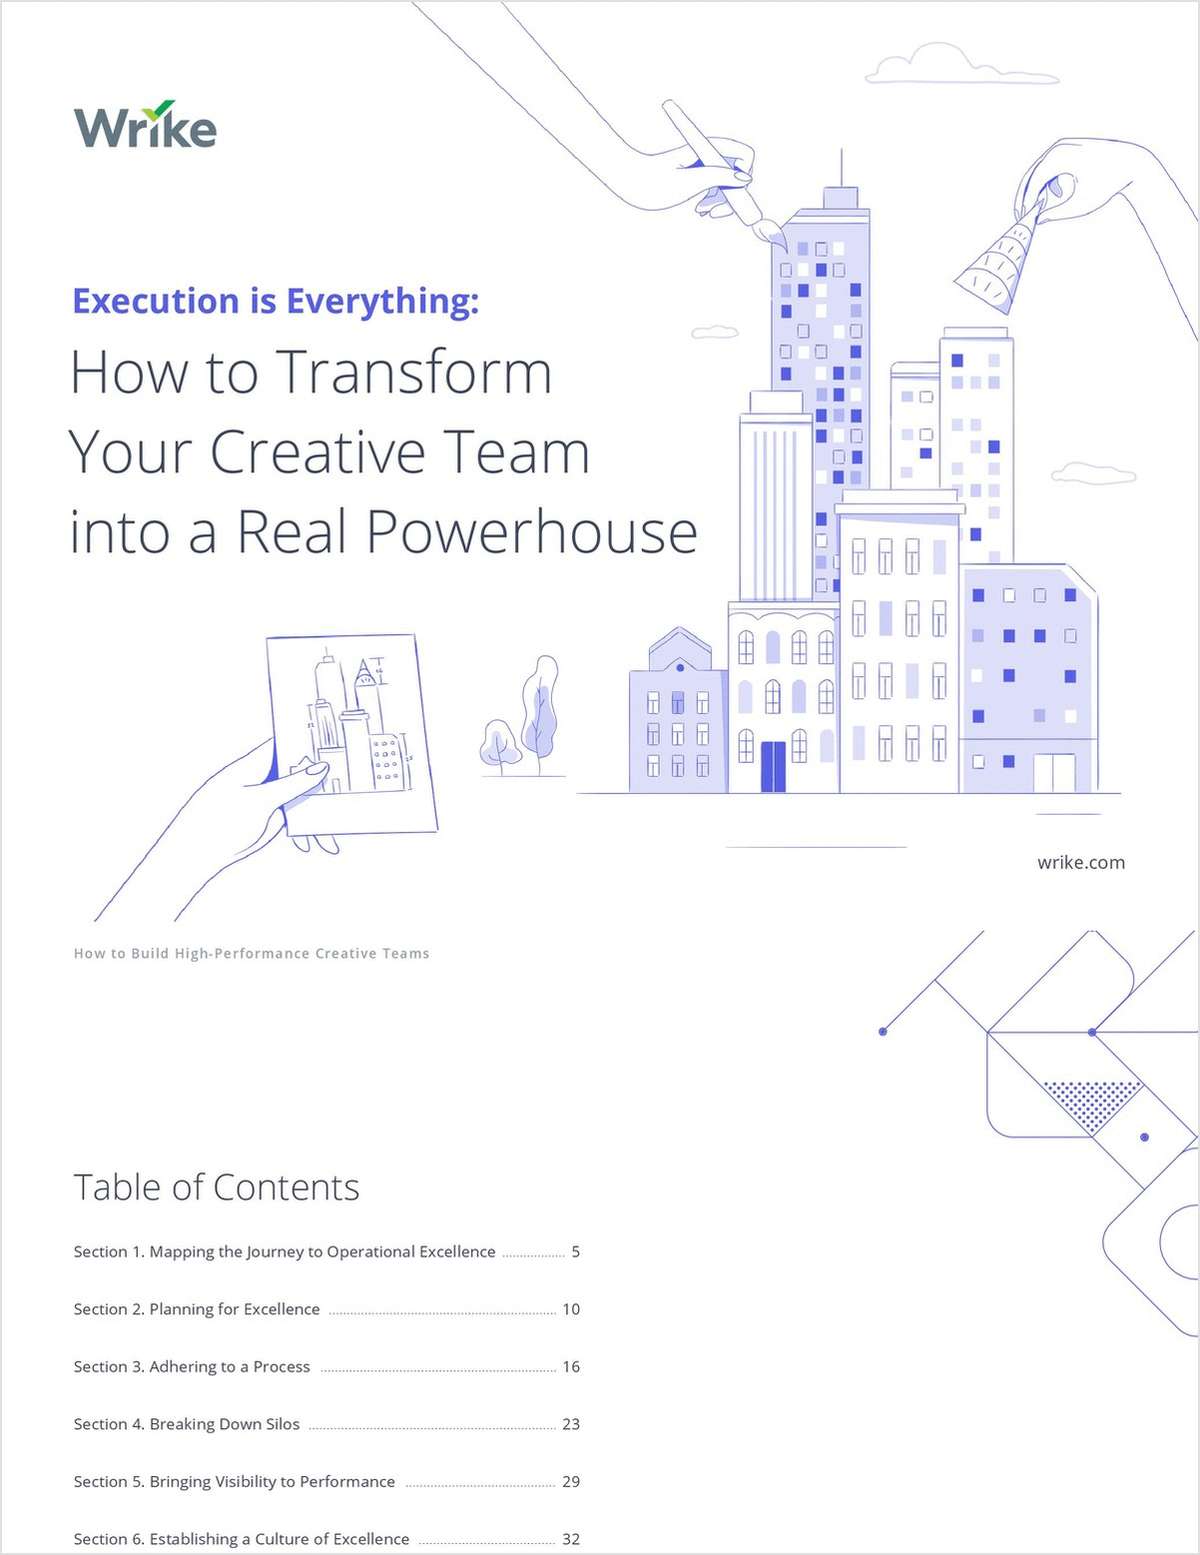 Execution is Everything: How to Transform Your Creative Team into a Real Powerhouse